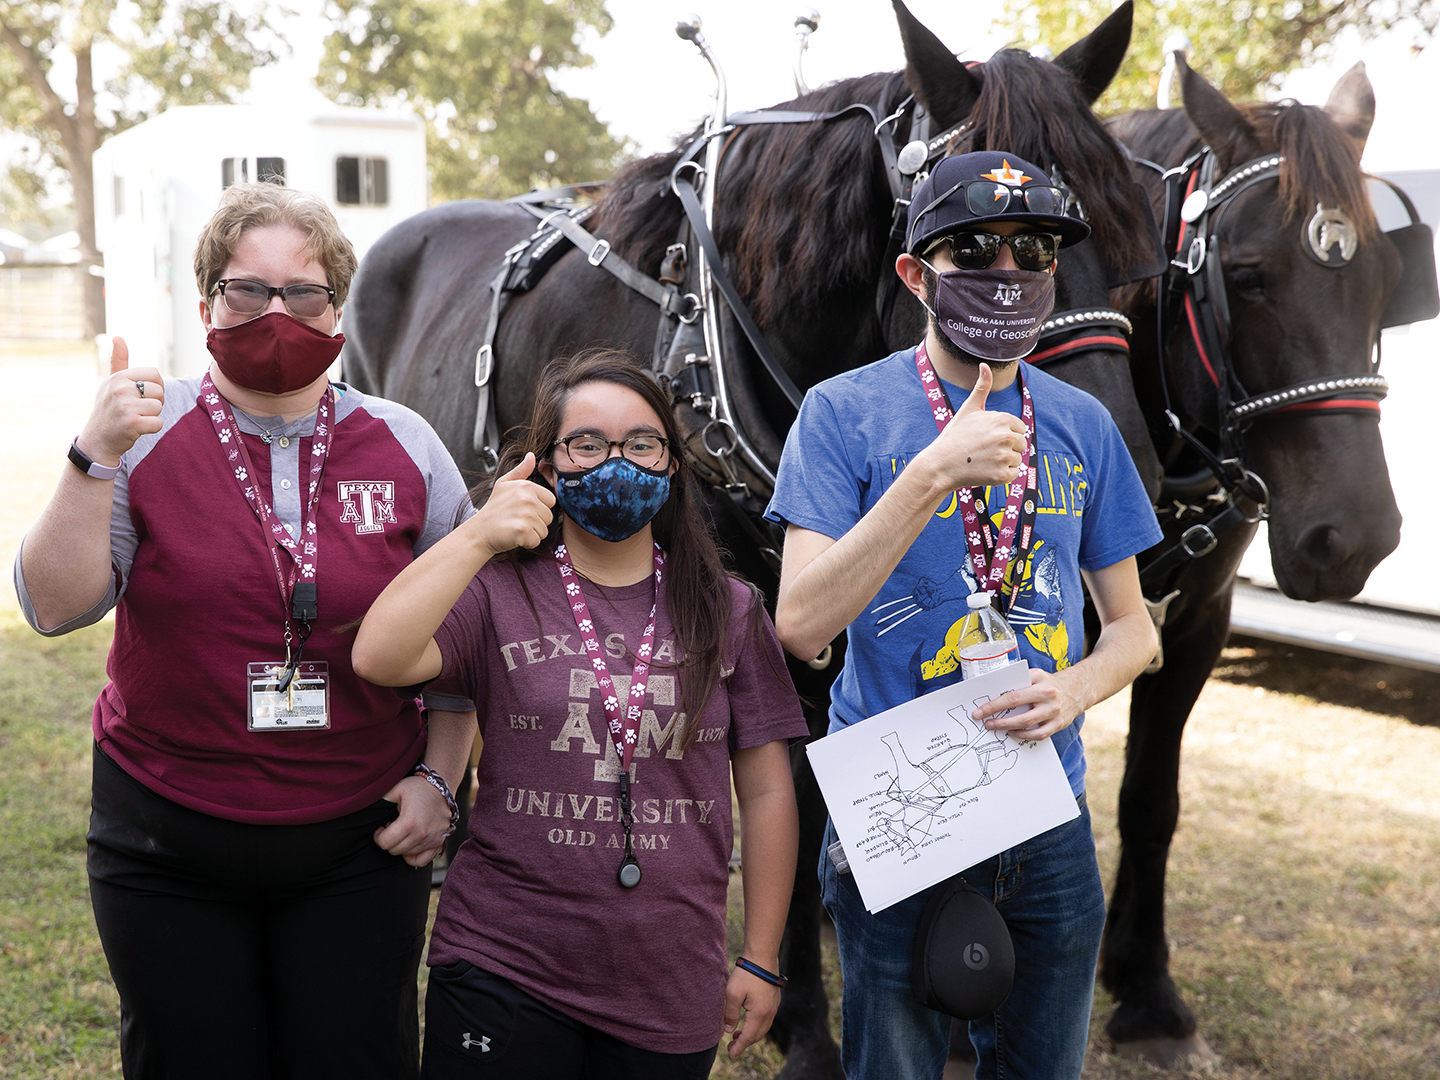 Three students give thumbs up in front of two black draft horses